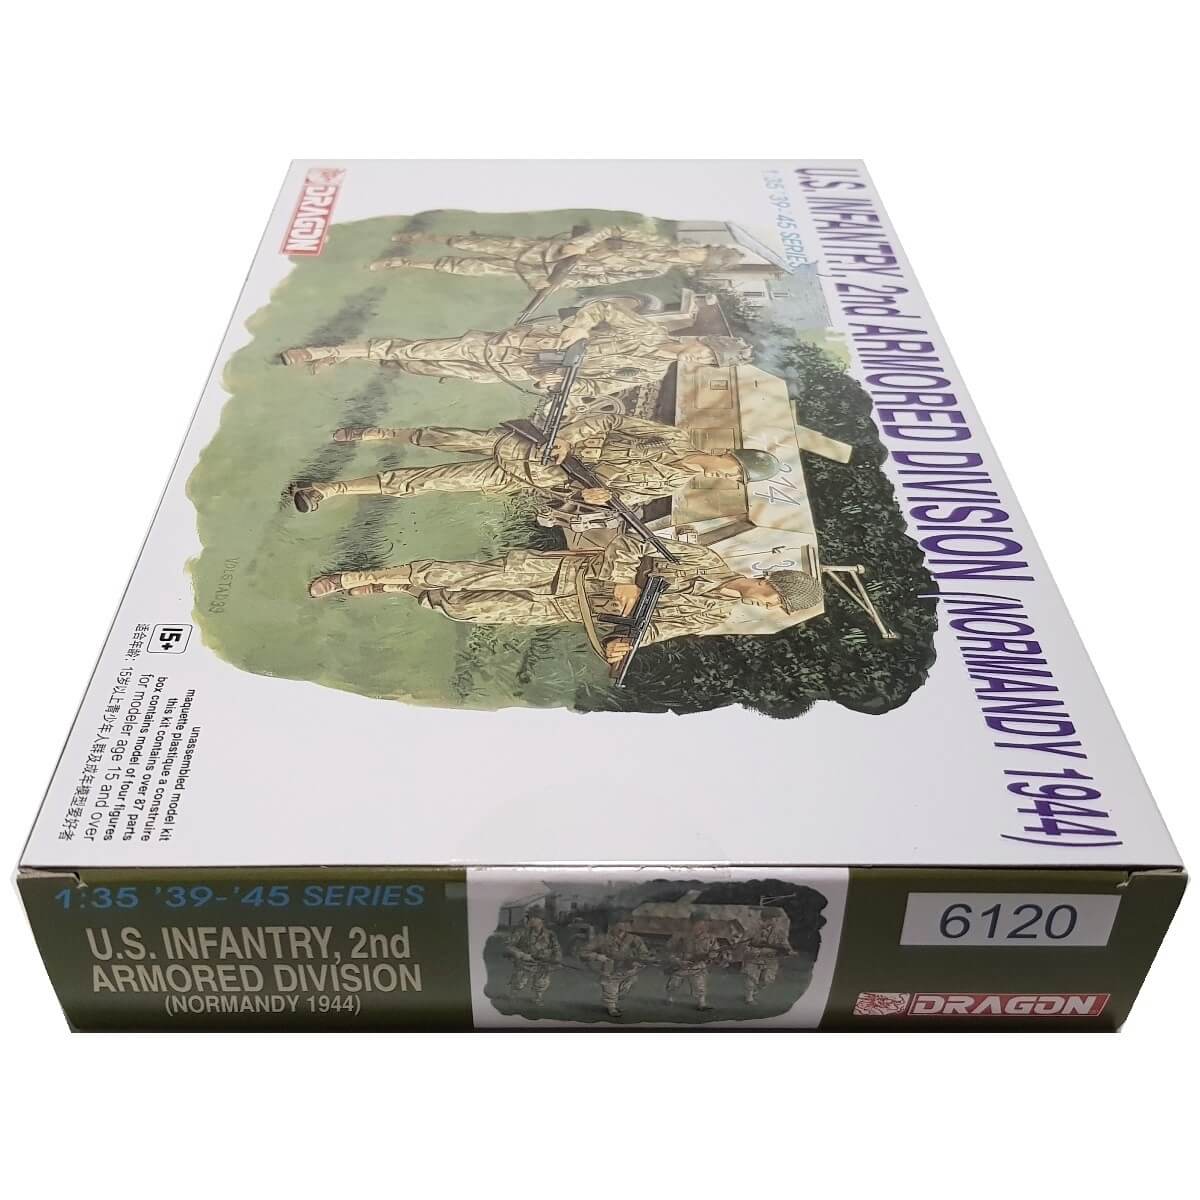 1:35 US Infantry 2nd Armored Division - Normandy 1944 - DRAGON